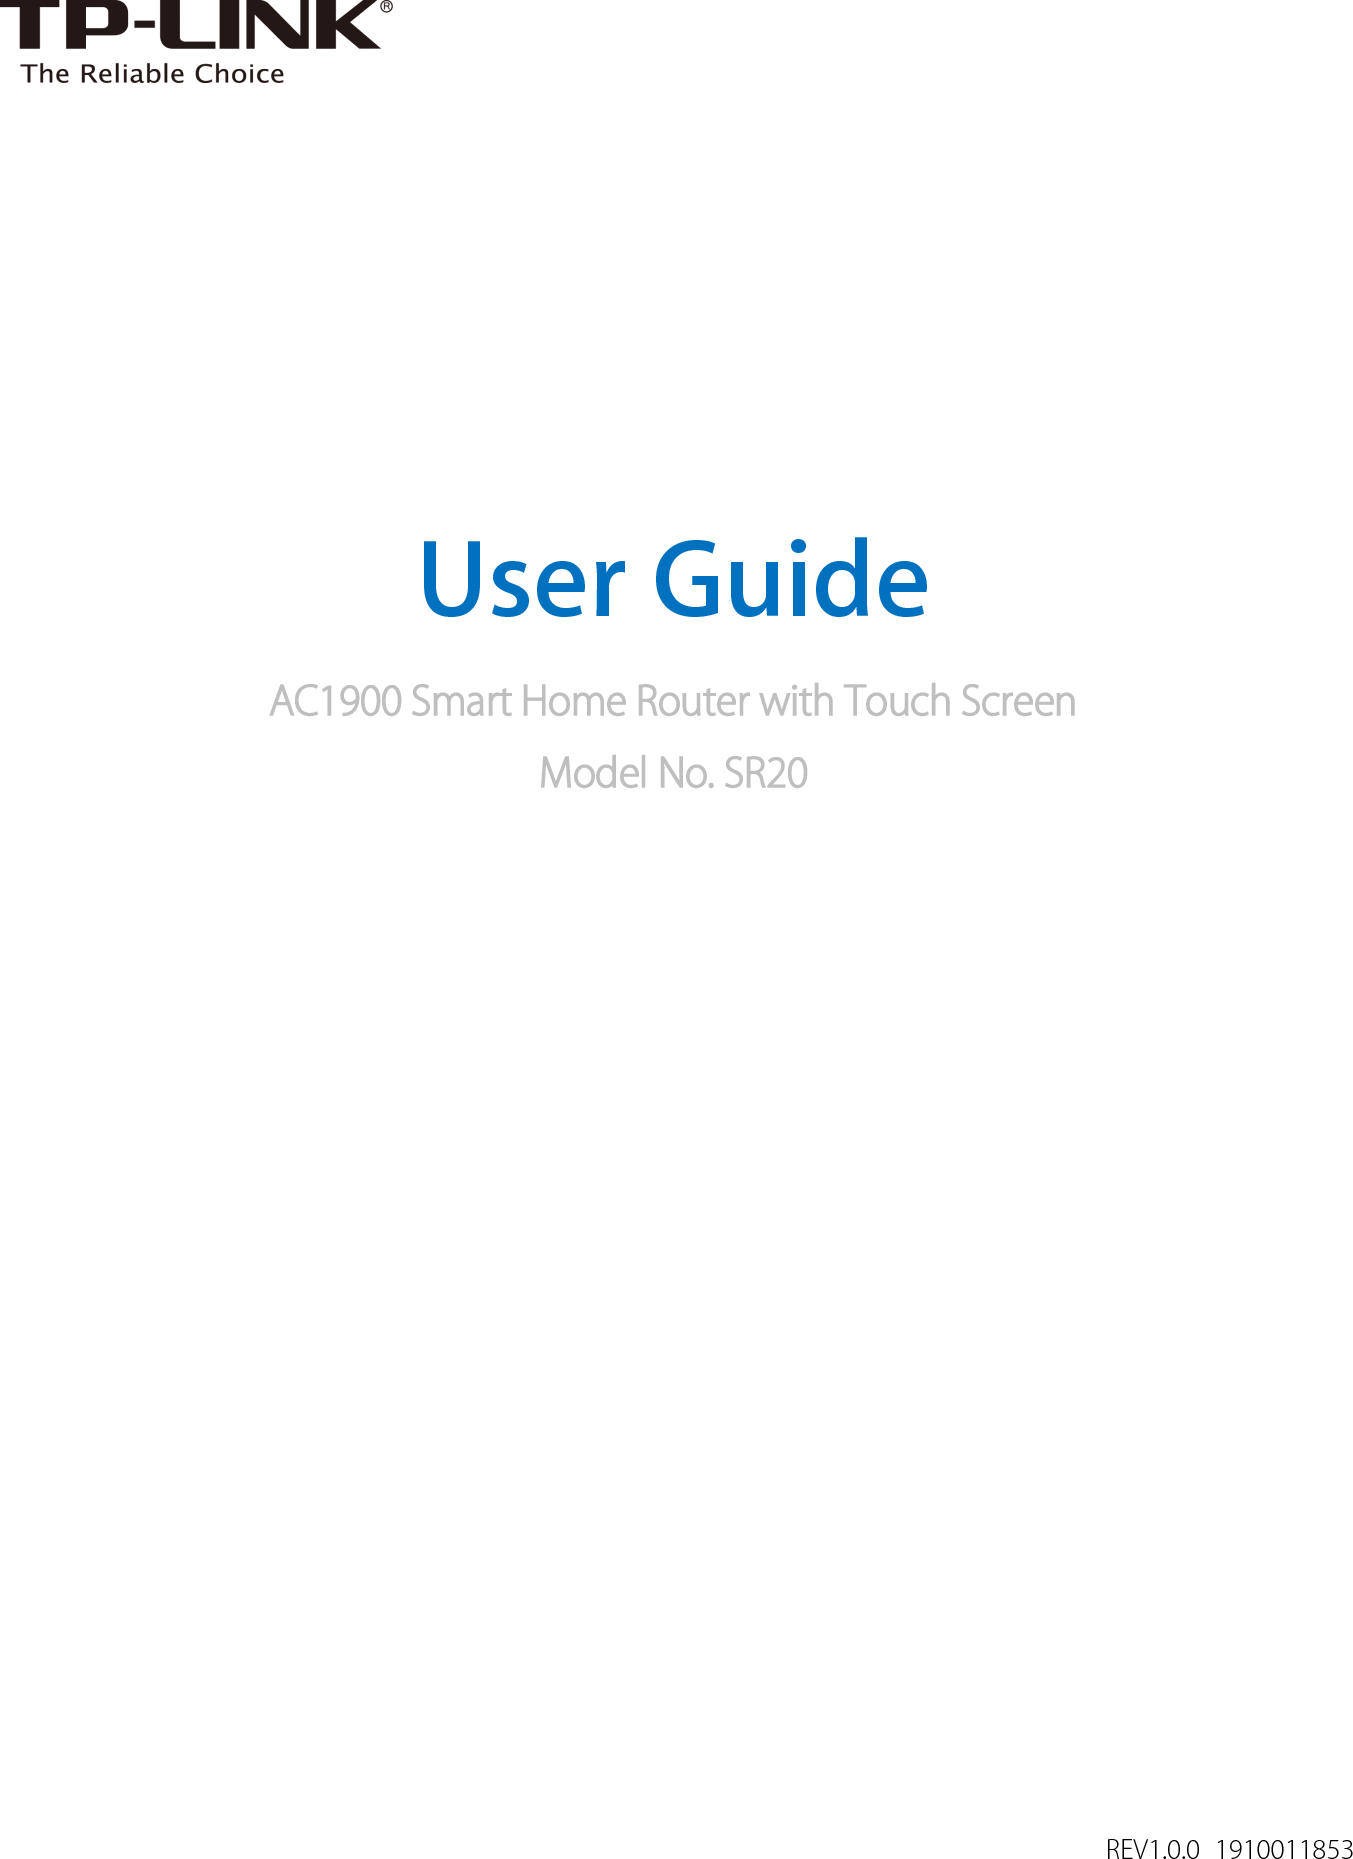    User Guide AC1900 Smart Home Router with Touch Screen Model No. SR20   REV1.0.0  1910011853 